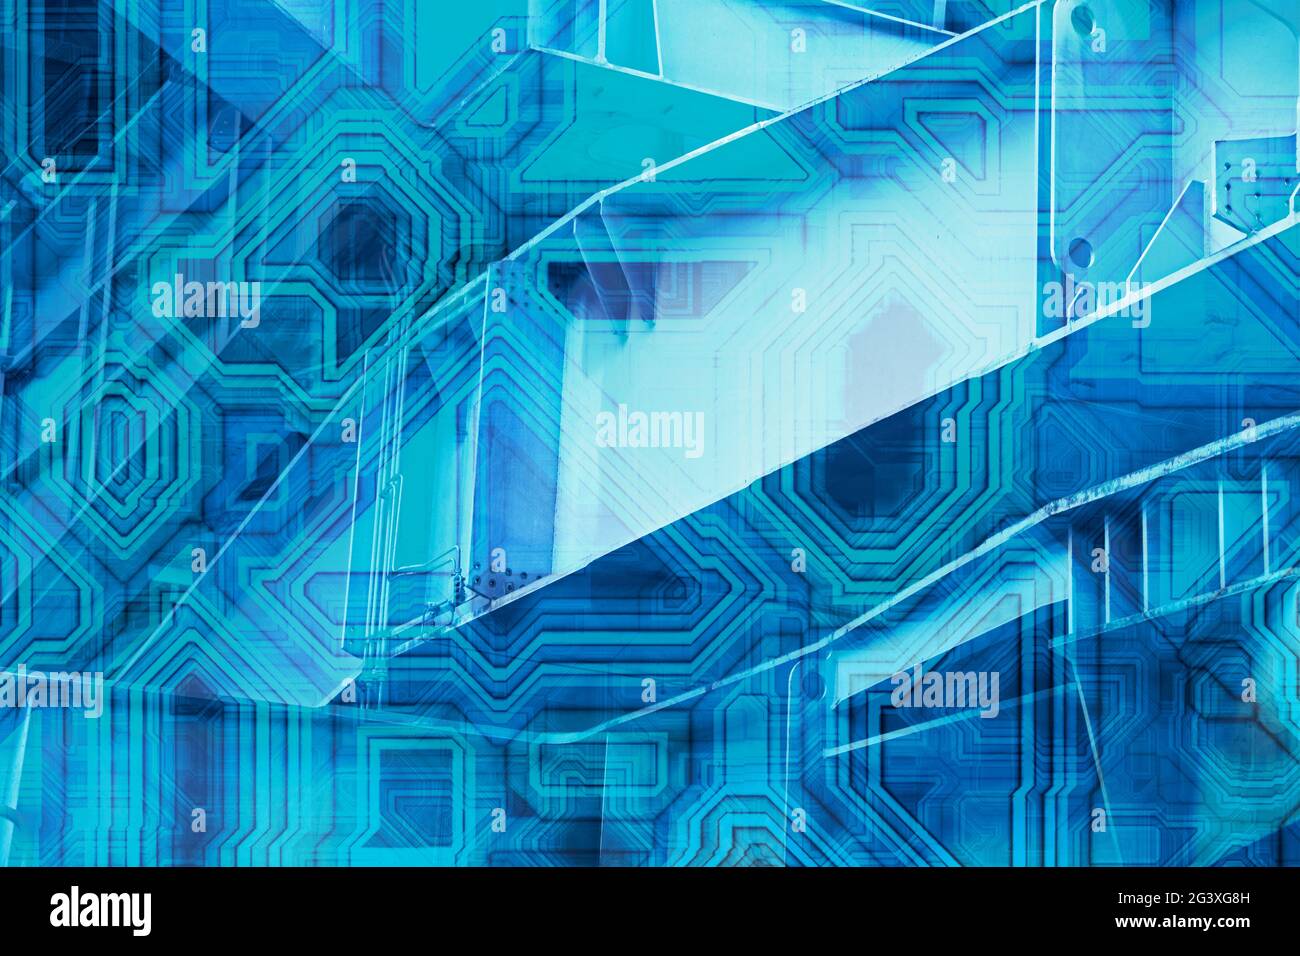 Abstract blue technological background Stock Photo